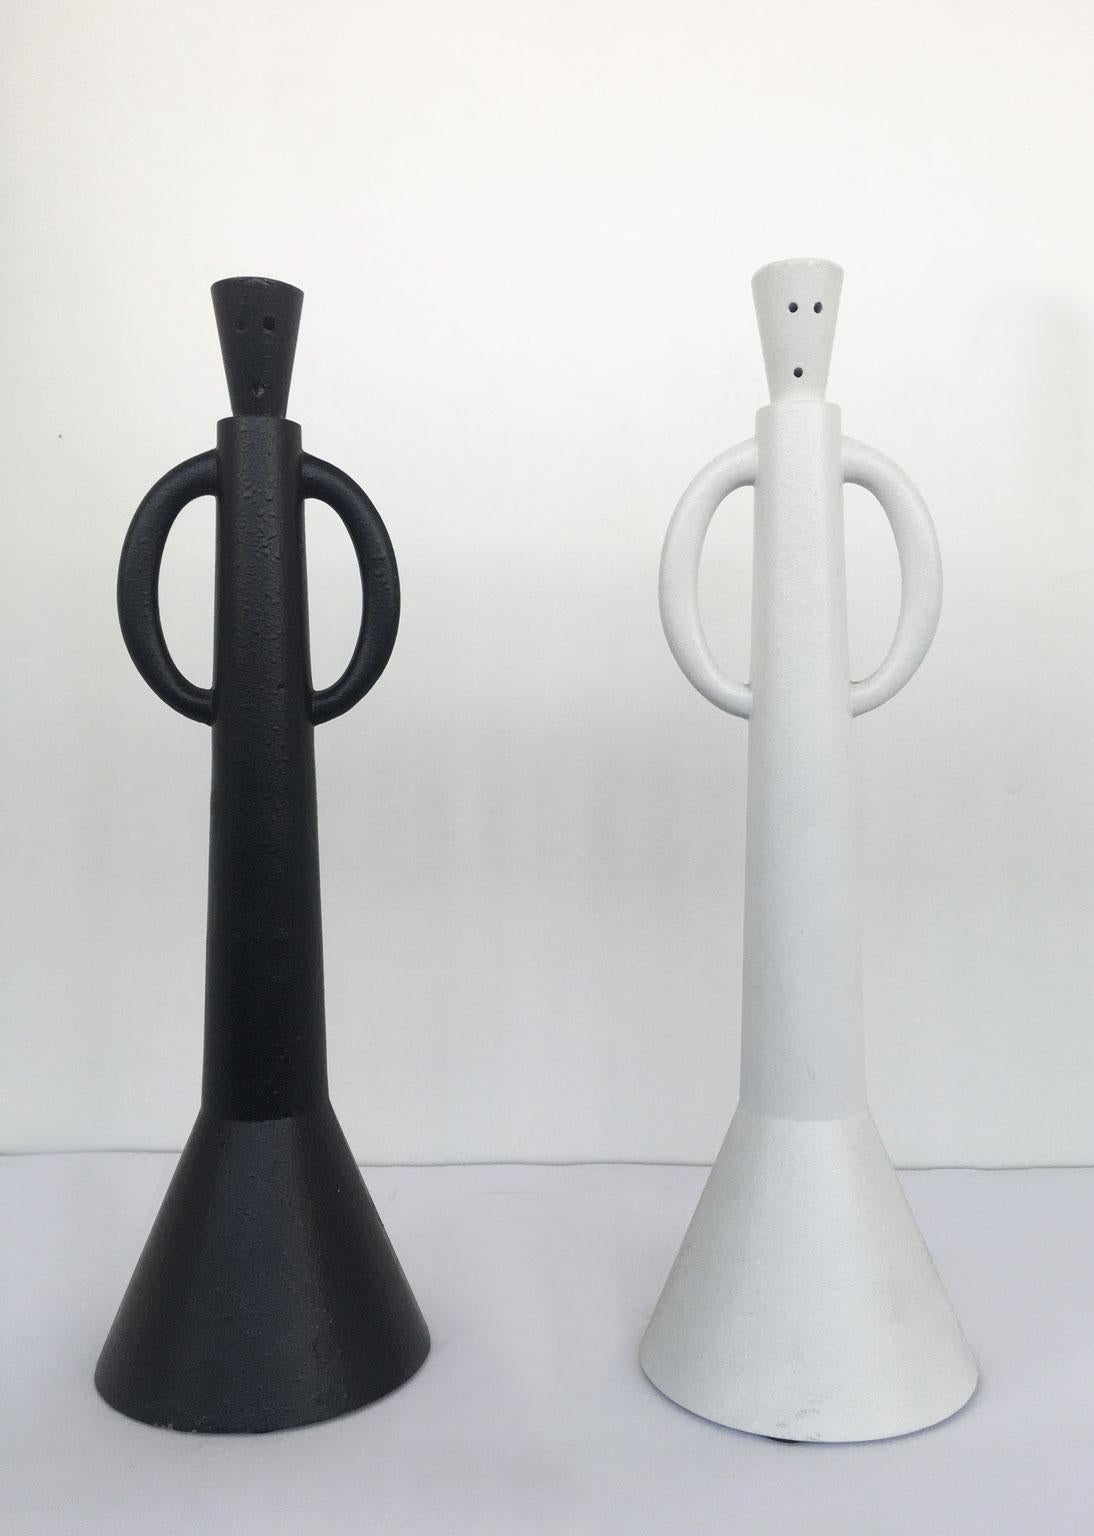 This artwork was created by the Italian artist Alessandro Guierriero, it is a multiple of a serie of specimens made in limited edition not numbered.
The set is forged in aluminum and painted in black and white. Their arms are handles to manage them